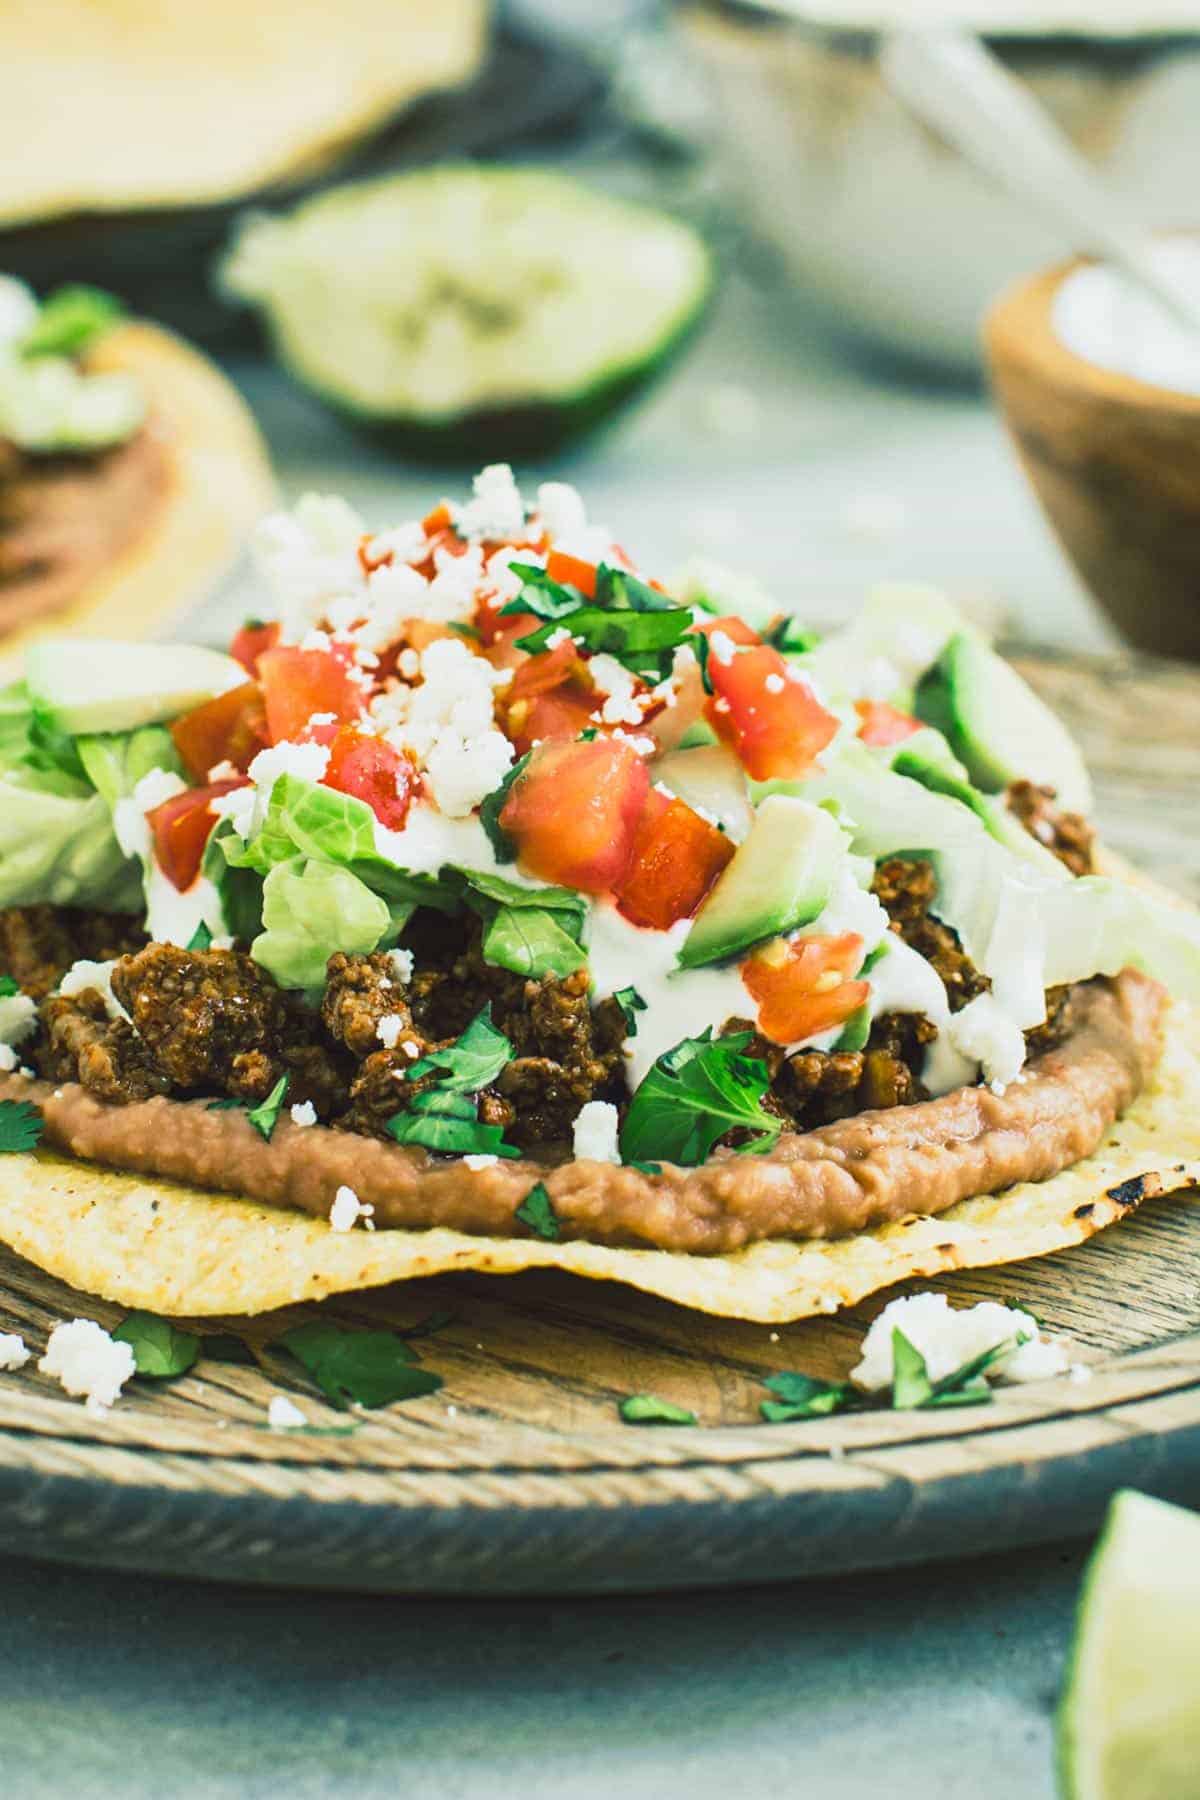 Beef tostadas with toppings on a wooden plate.